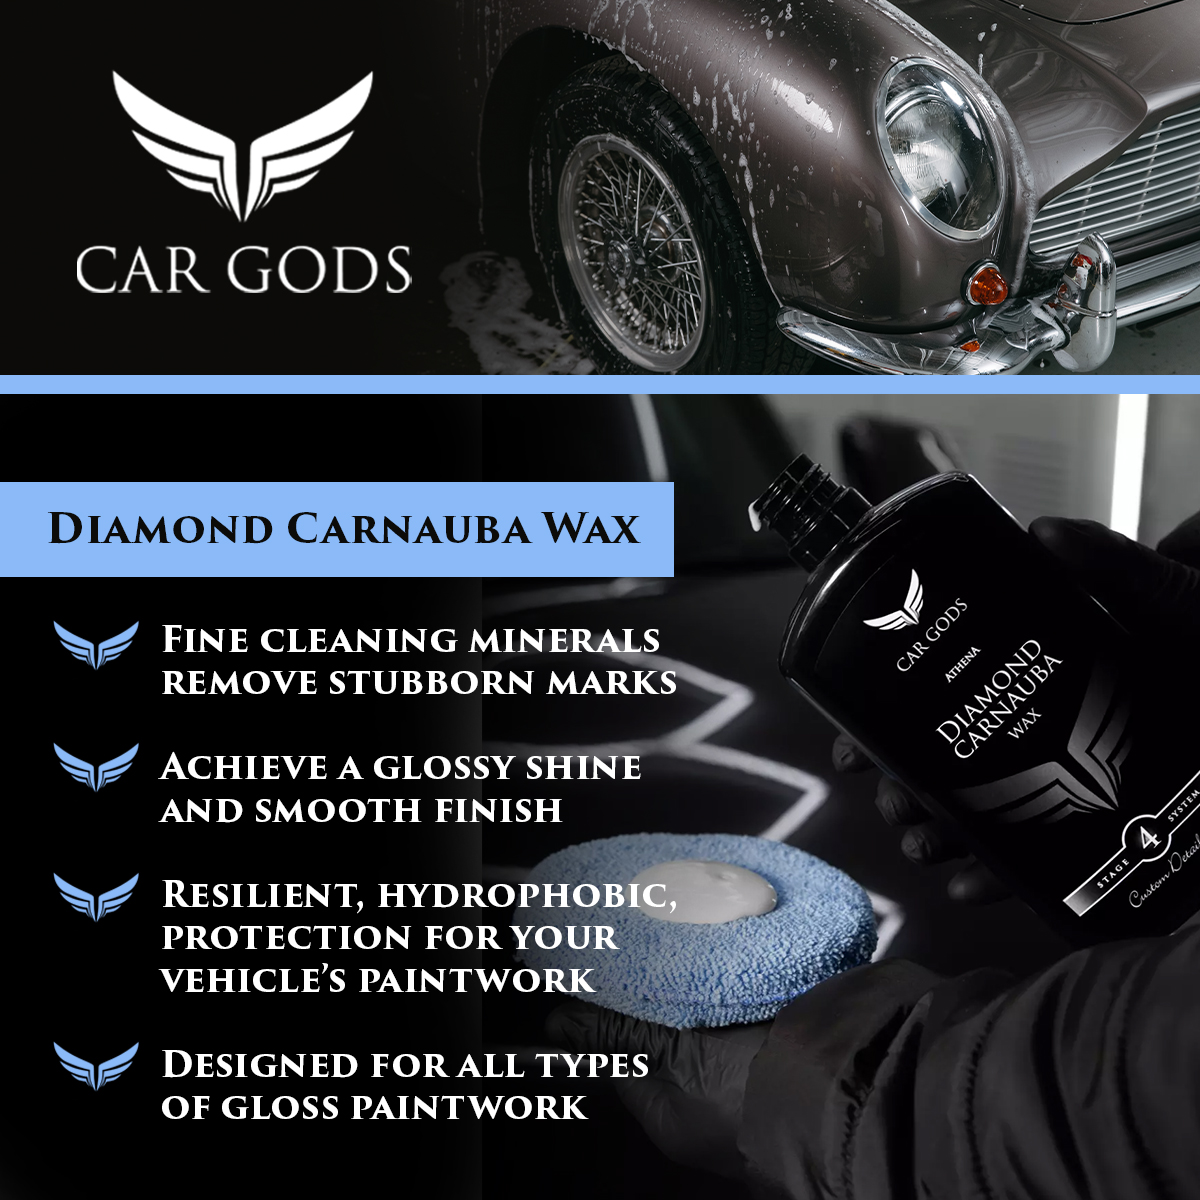 Car Gods Diamond Carnauba Wax. Designed for all types of gloss paintwork, the fine cleaning minerals remove stubborn marks and help you achieve a glossy shine and smooth finish. Plus, Diamond Carnauba Wax protects your vehicle with a resilient, hydrophobic coating.